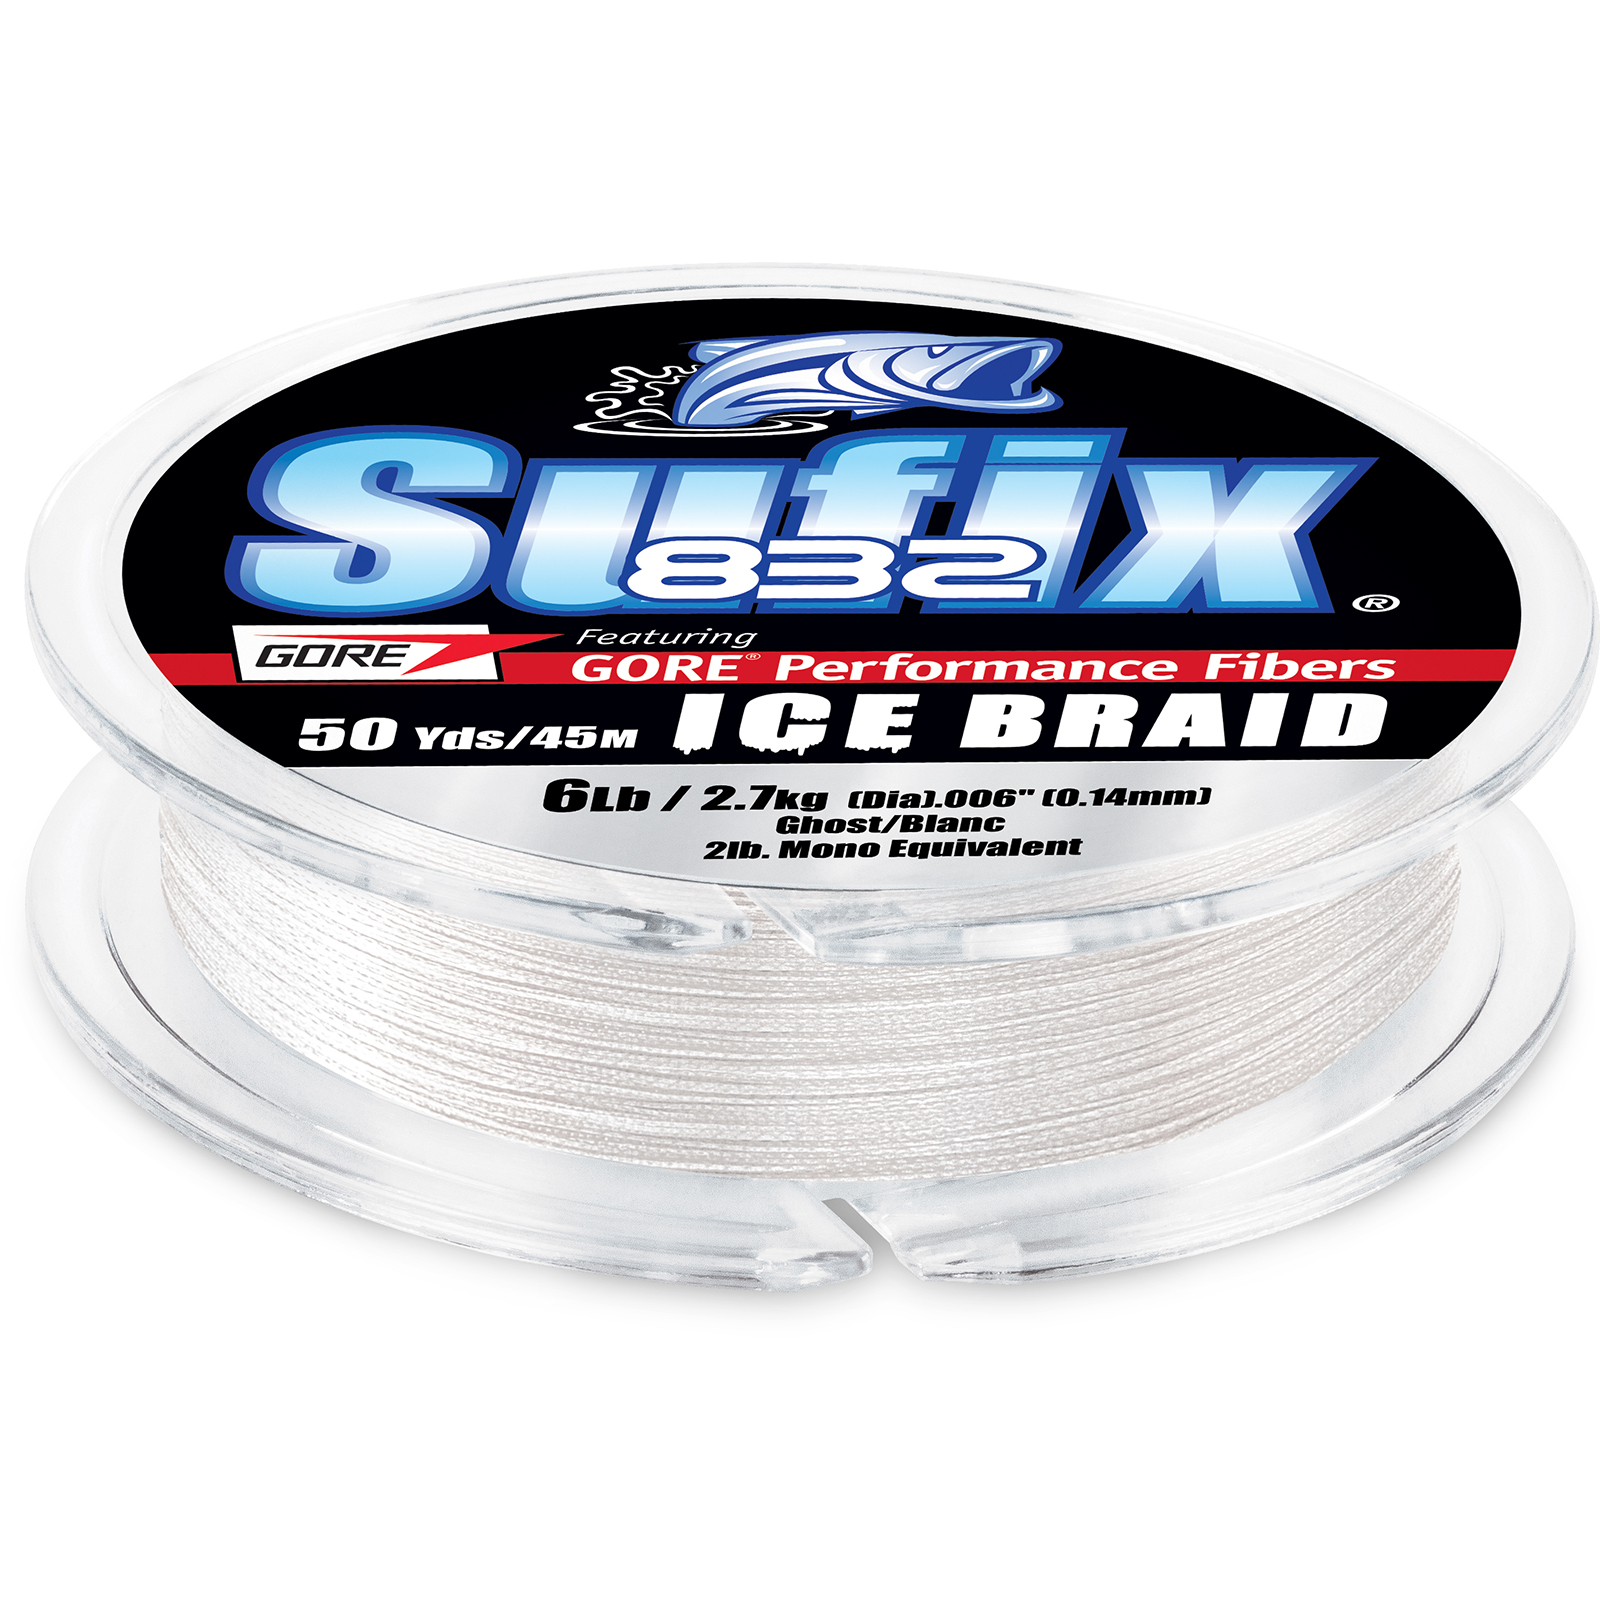 Sufix Performance Metered Tip-Up Ice Braid